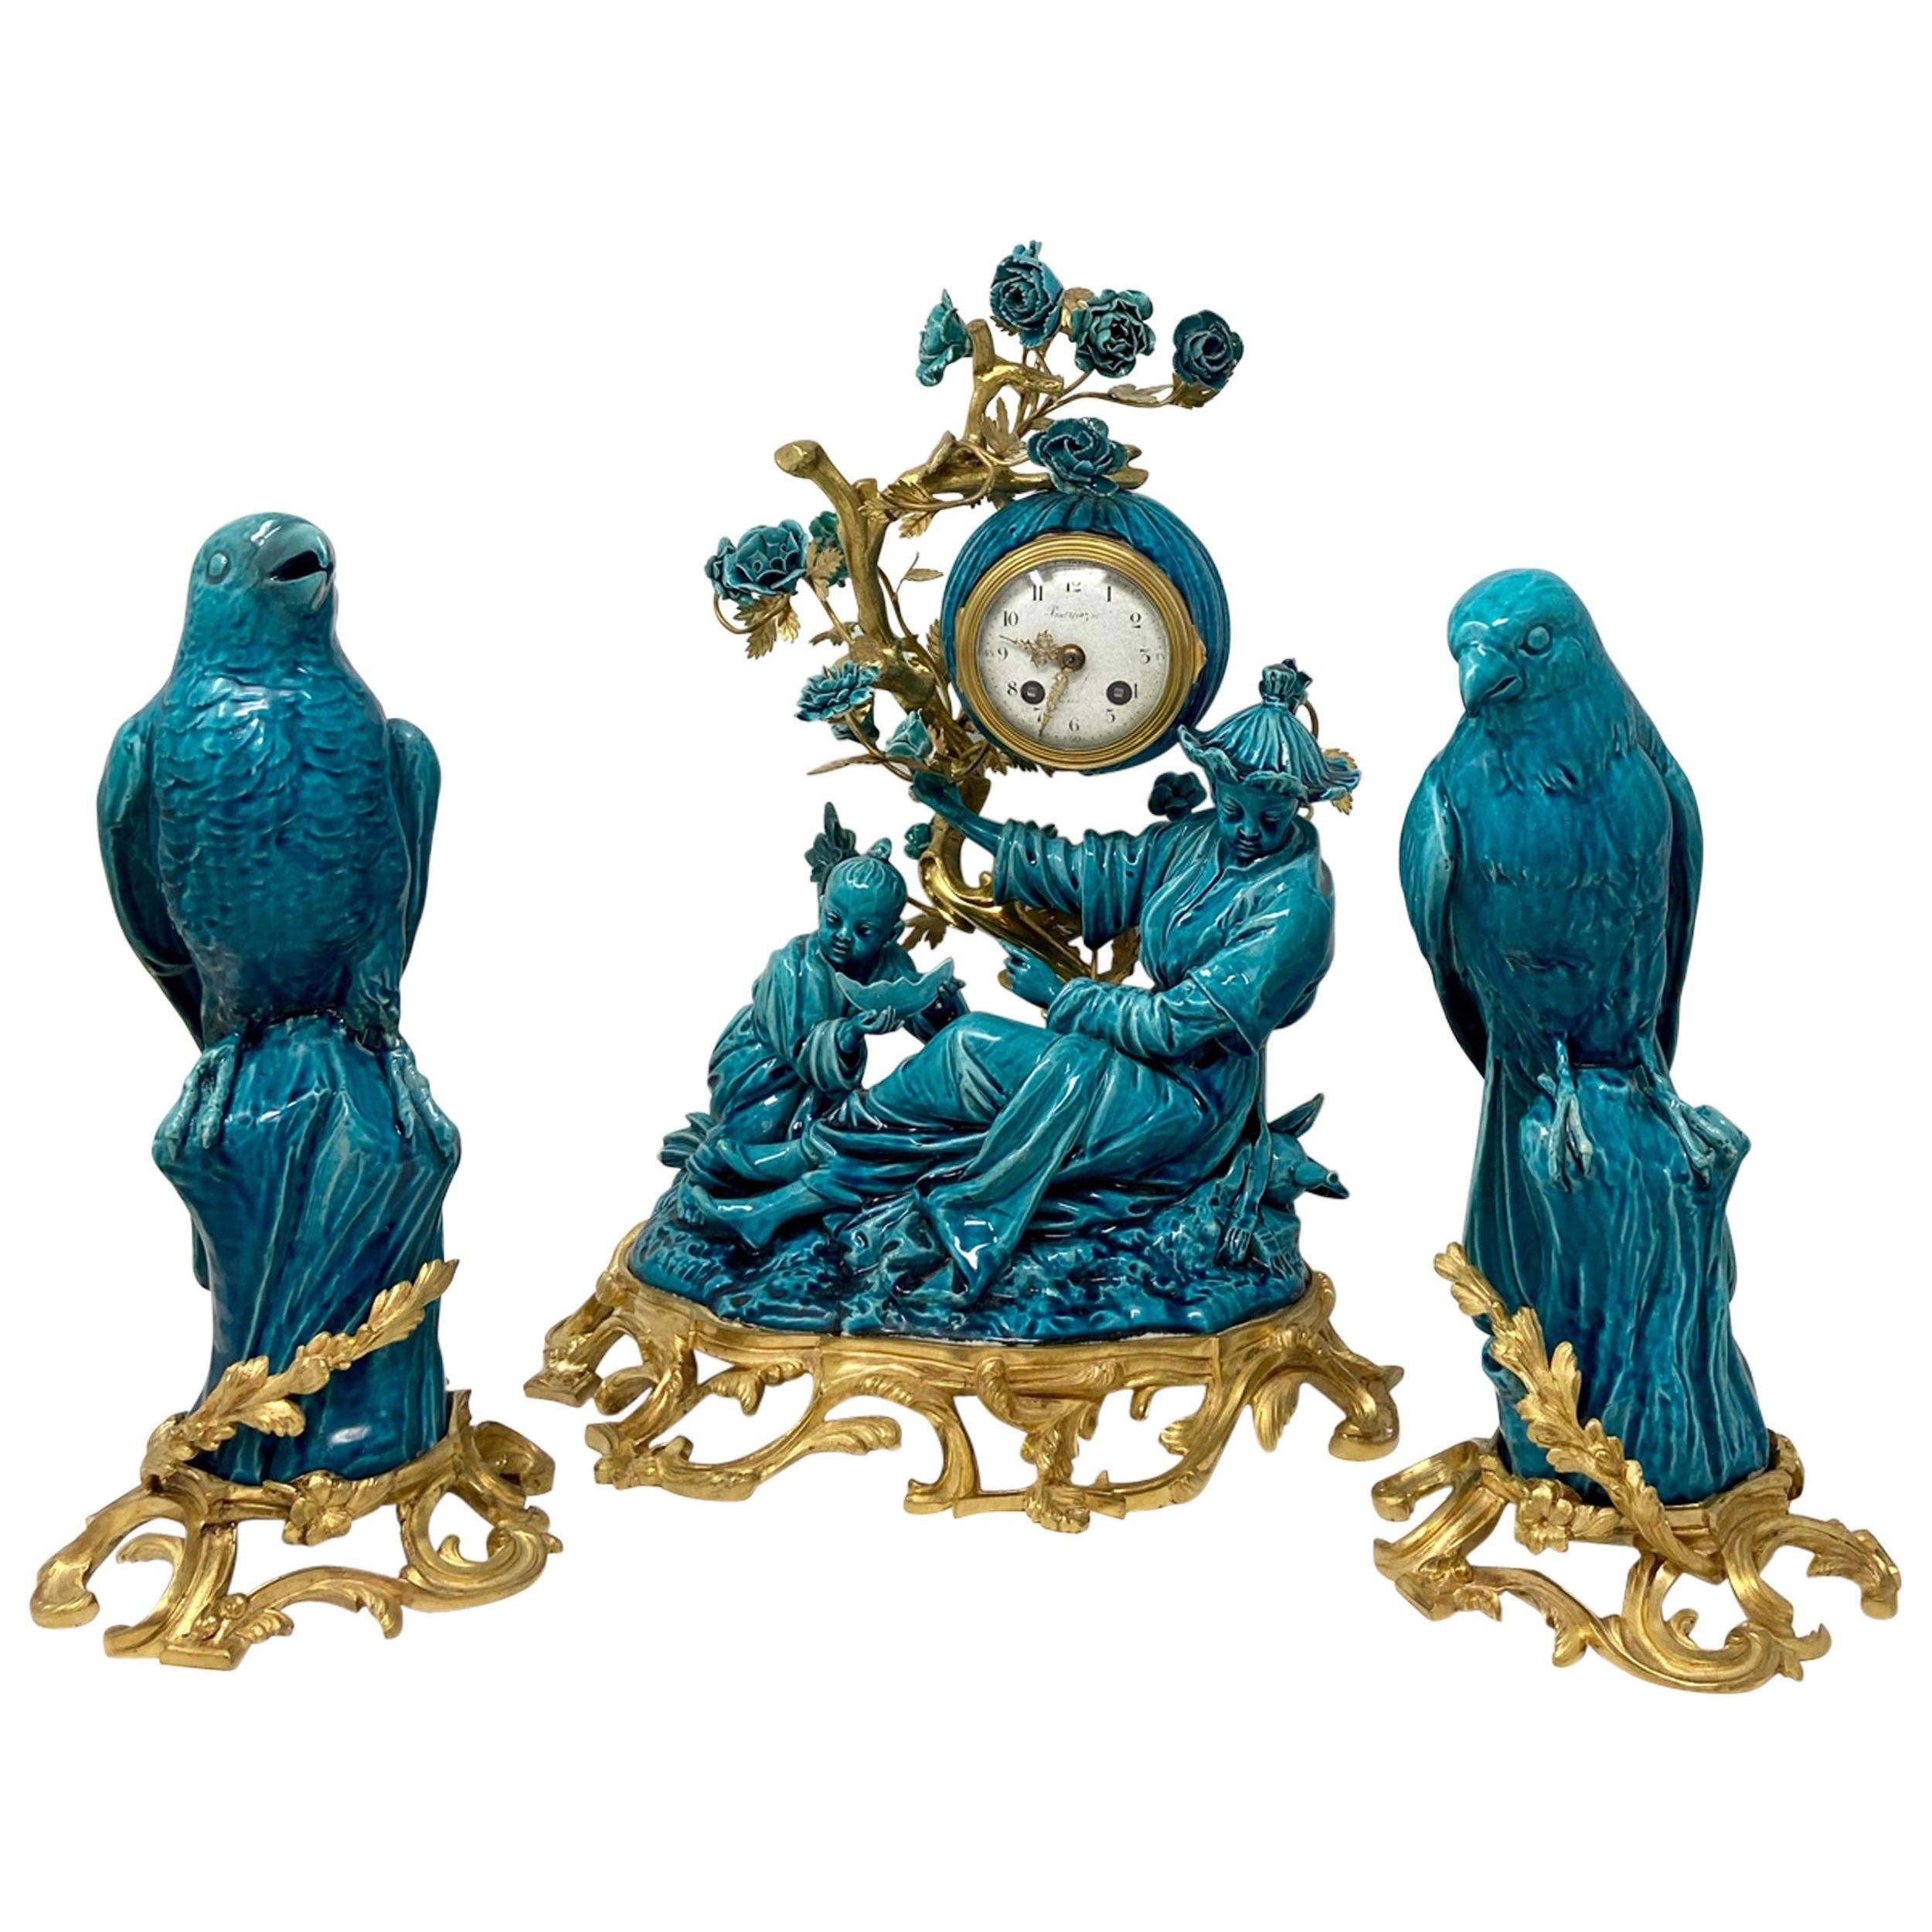 Antique French Chinoiserie Gold Bronze & Turquoise Porcelain Garniture Clock Set